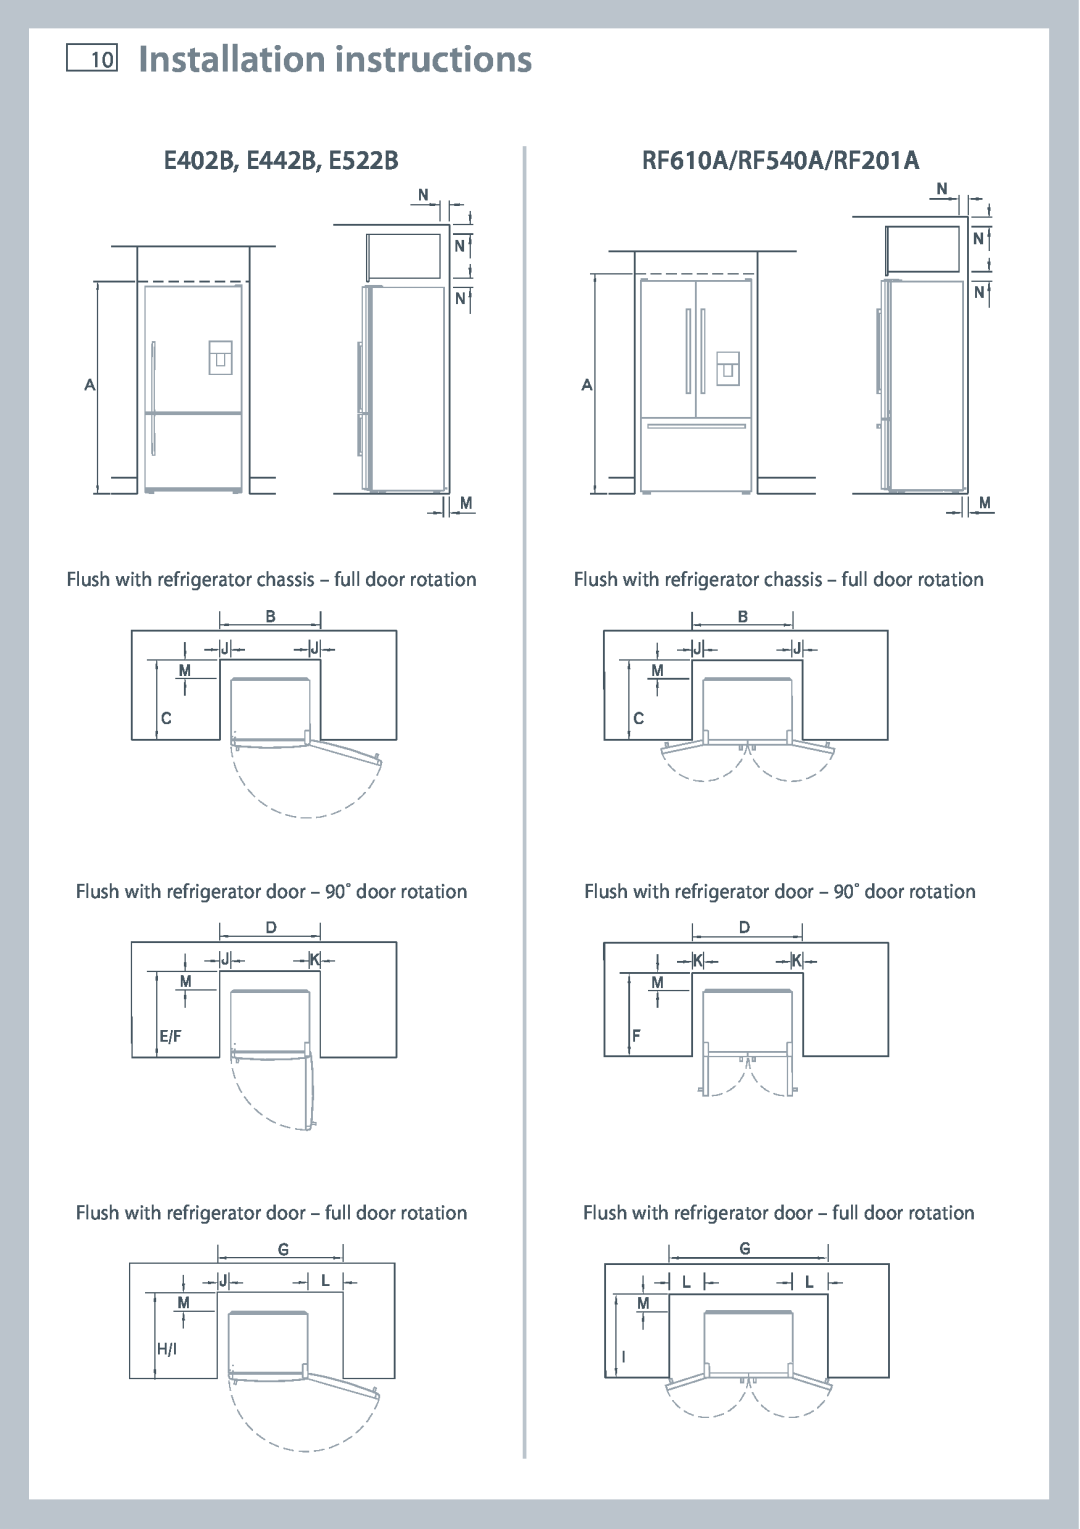 Fisher & Paykel installation instructions E402B, E442B, E522B, RF610A/RF540A/RF201A, Installation instructions 